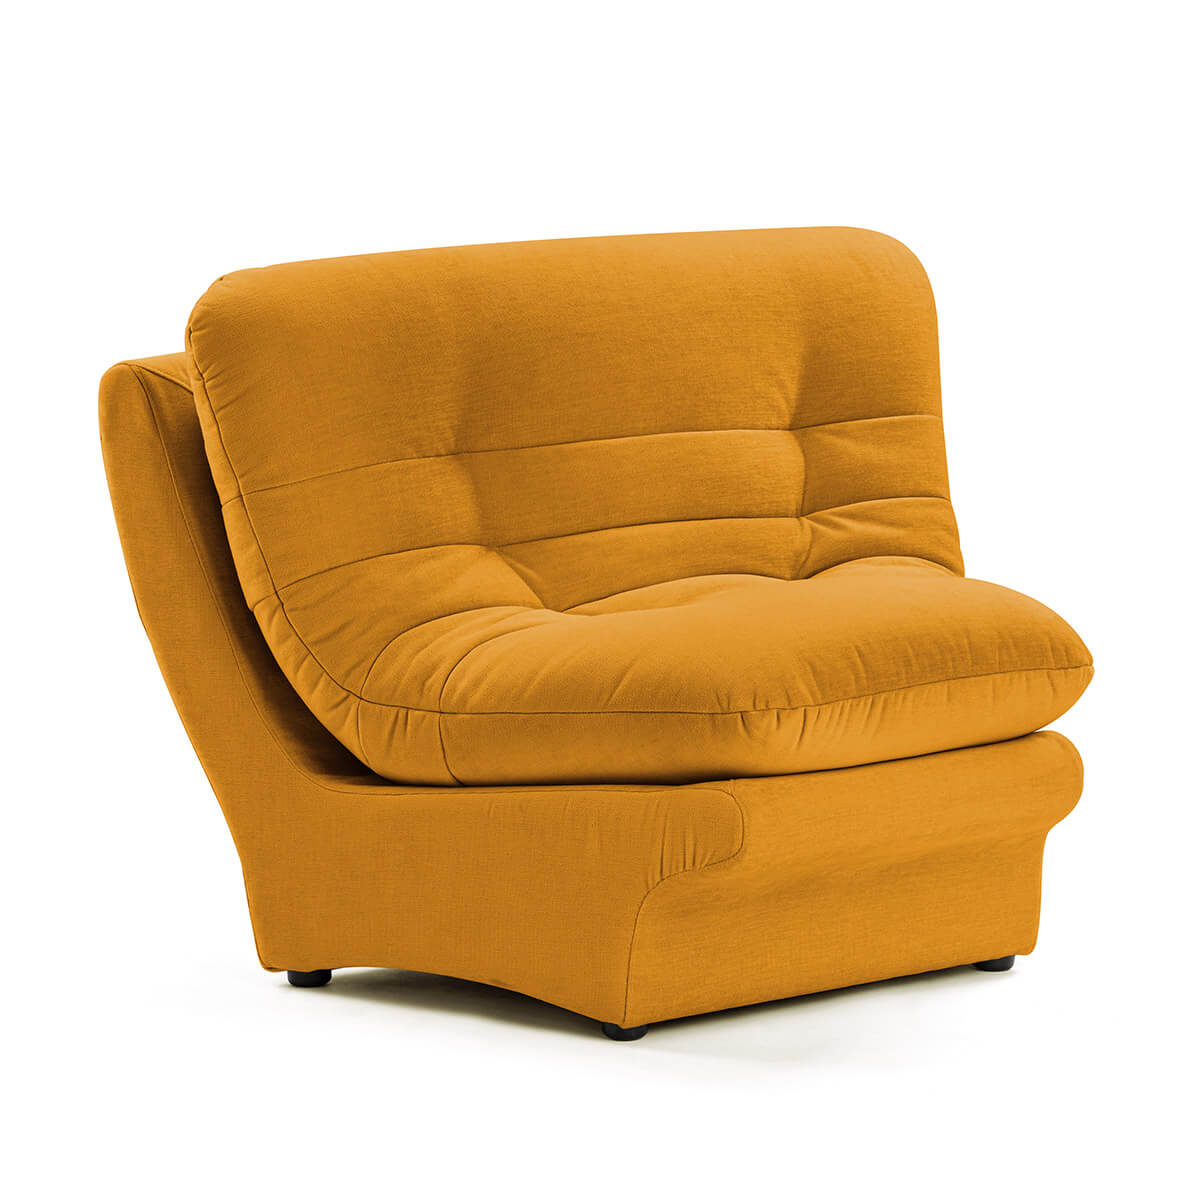 Carsons Mid Century Curved Modular Sectional Sofa / Corner Module Chenille Helios-Mustard Yellow